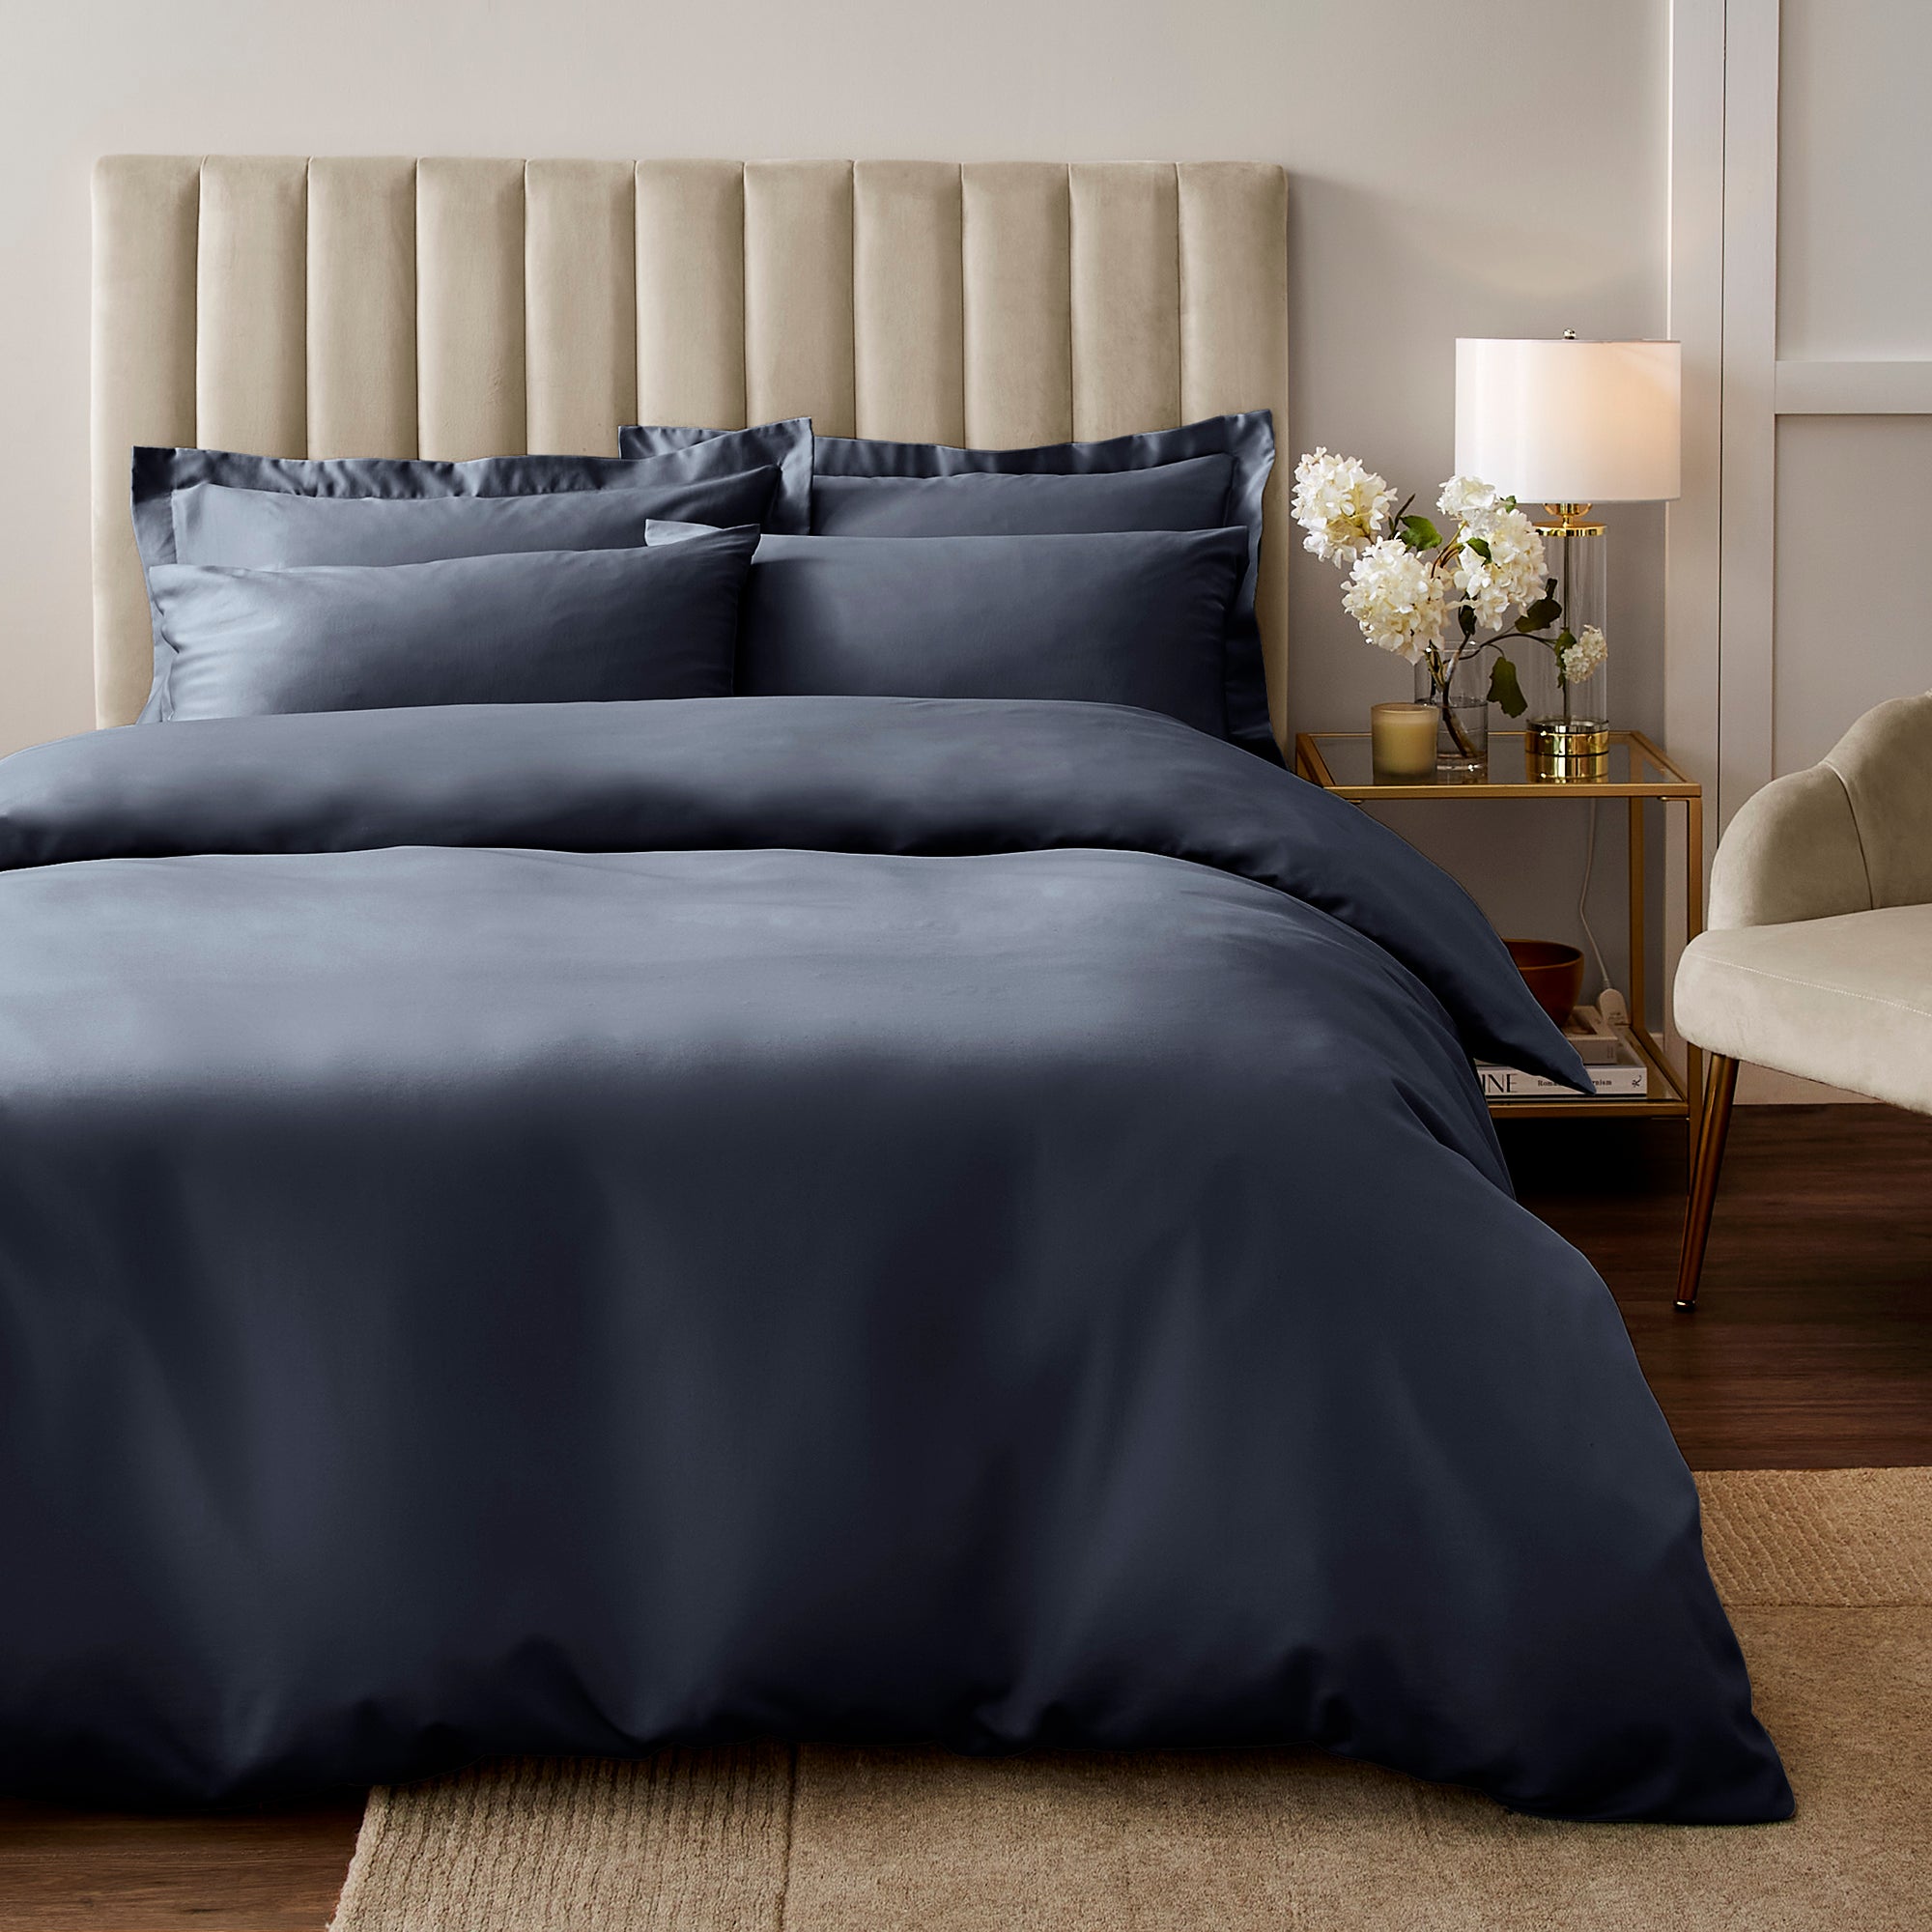 Soft Silky Duvet Cover And Pillowcase Set Luxe Navy